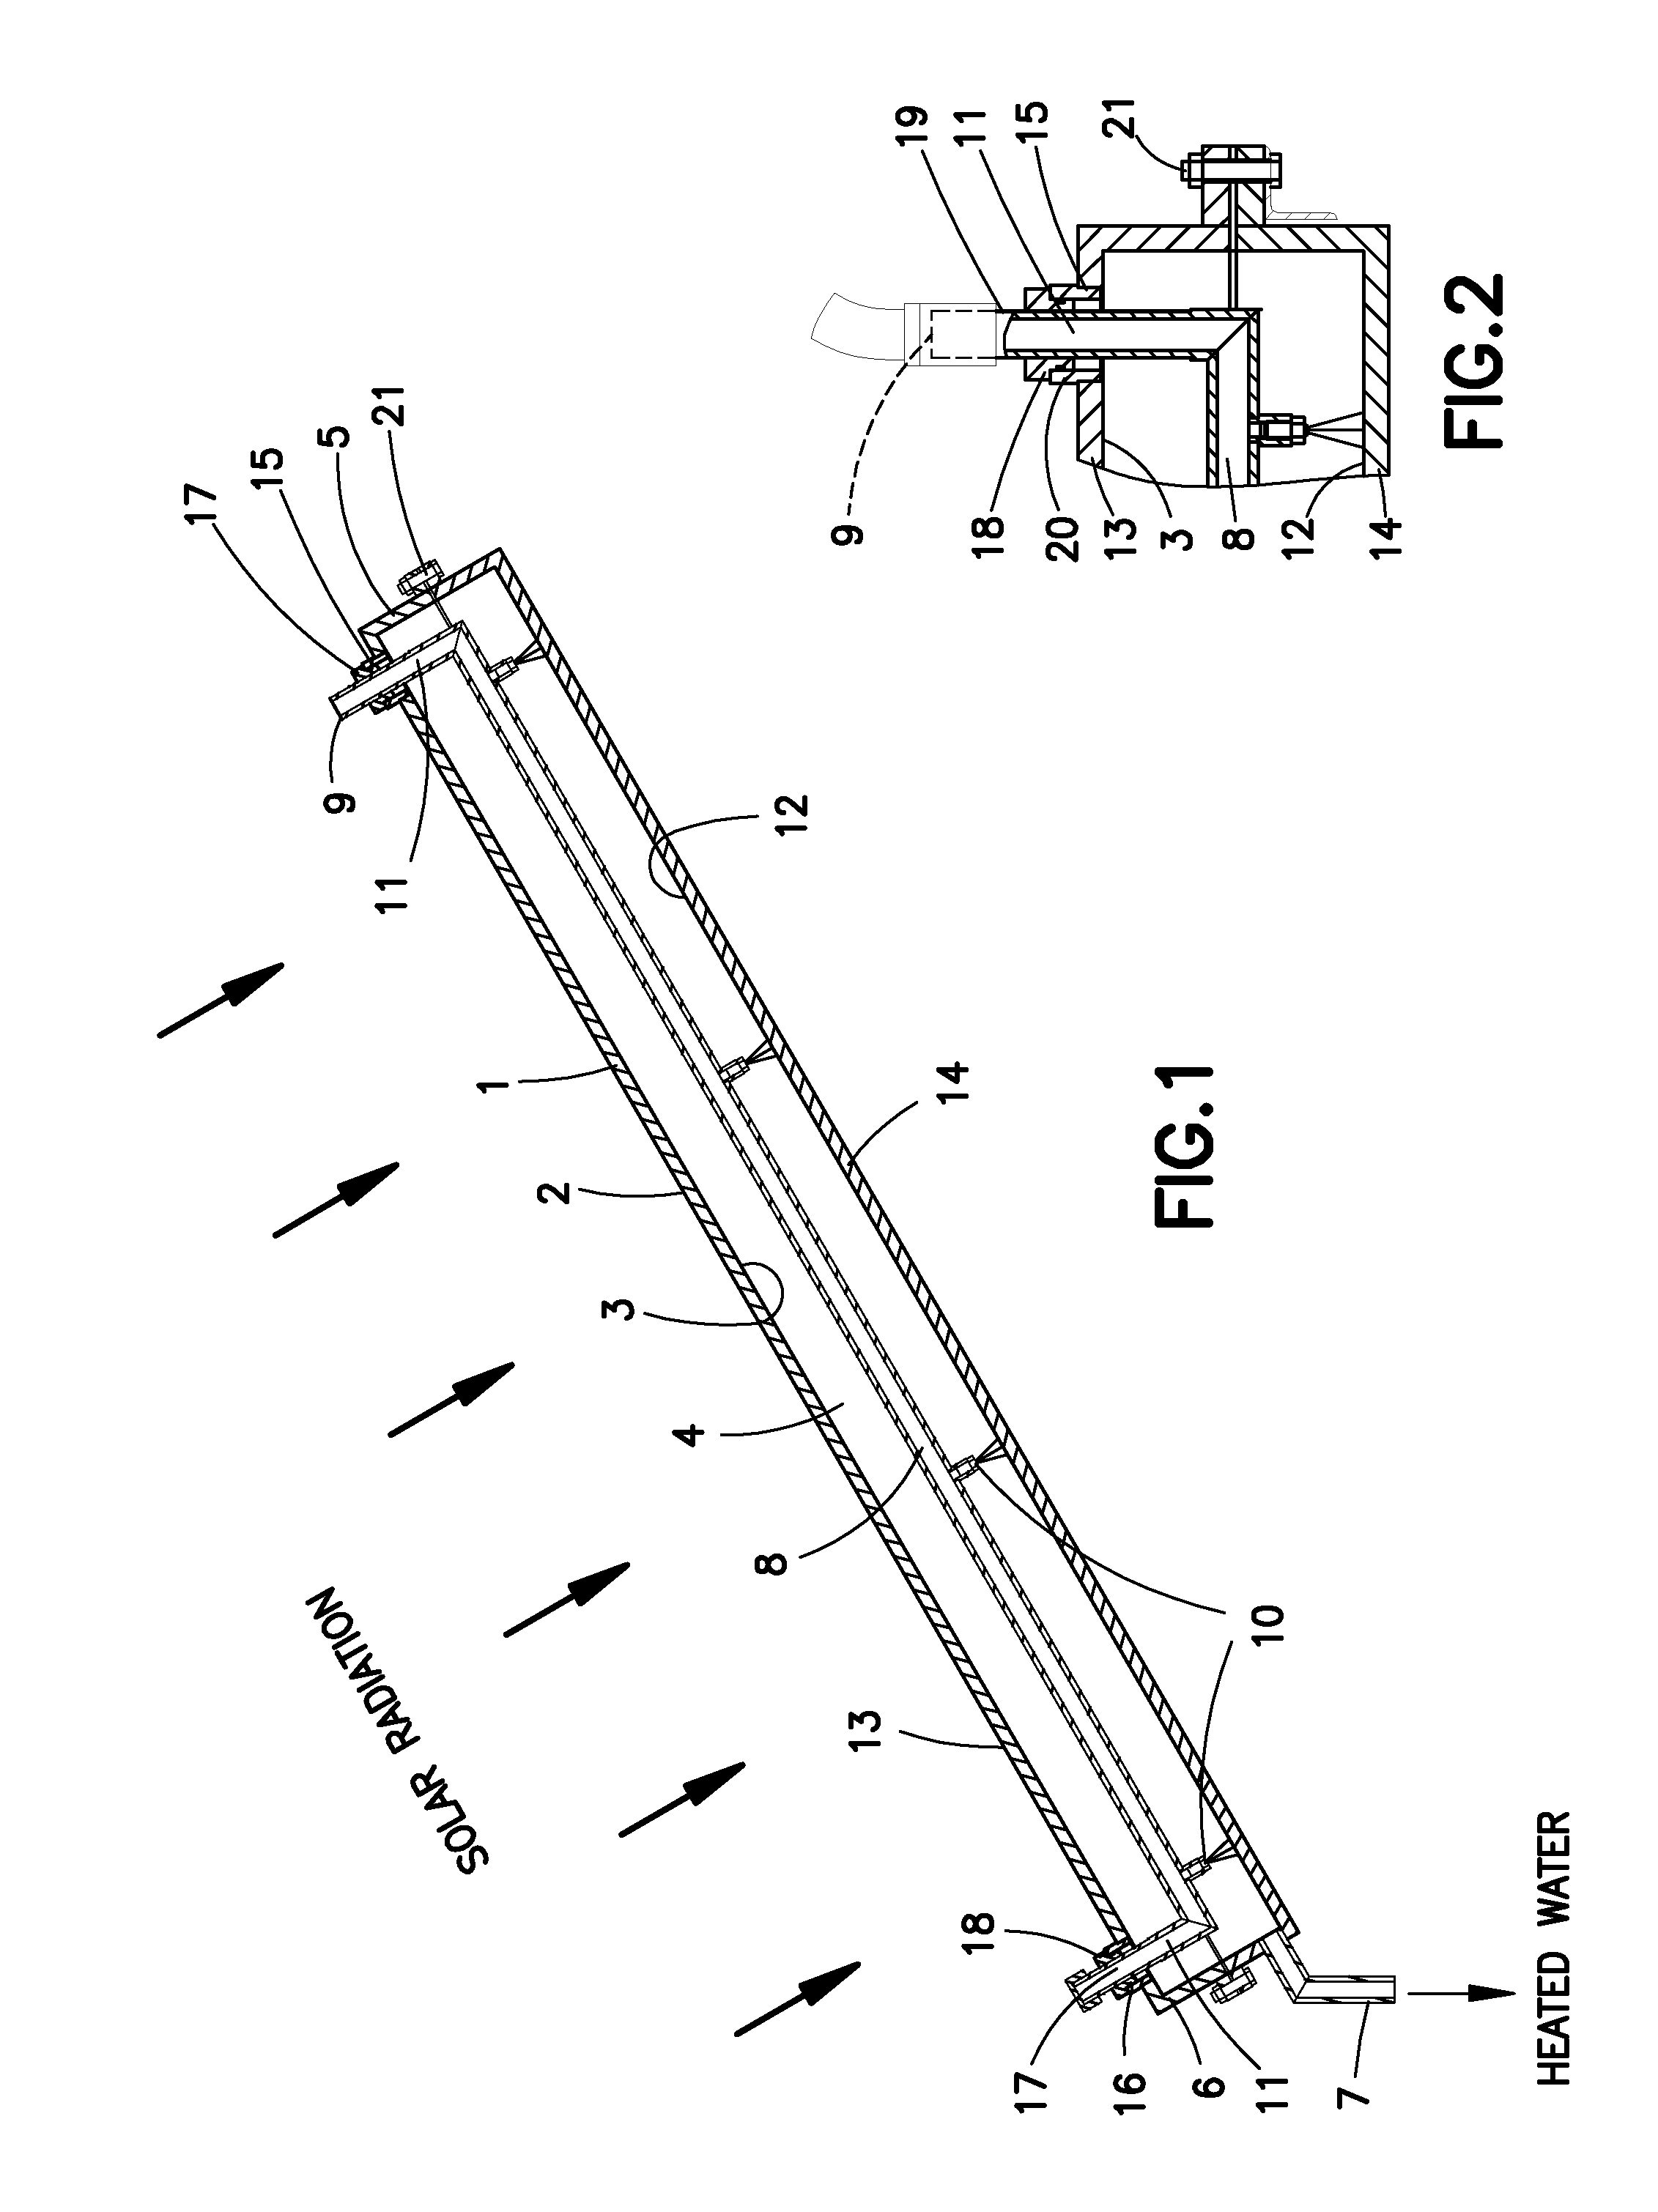 Solar radiation collection system and method